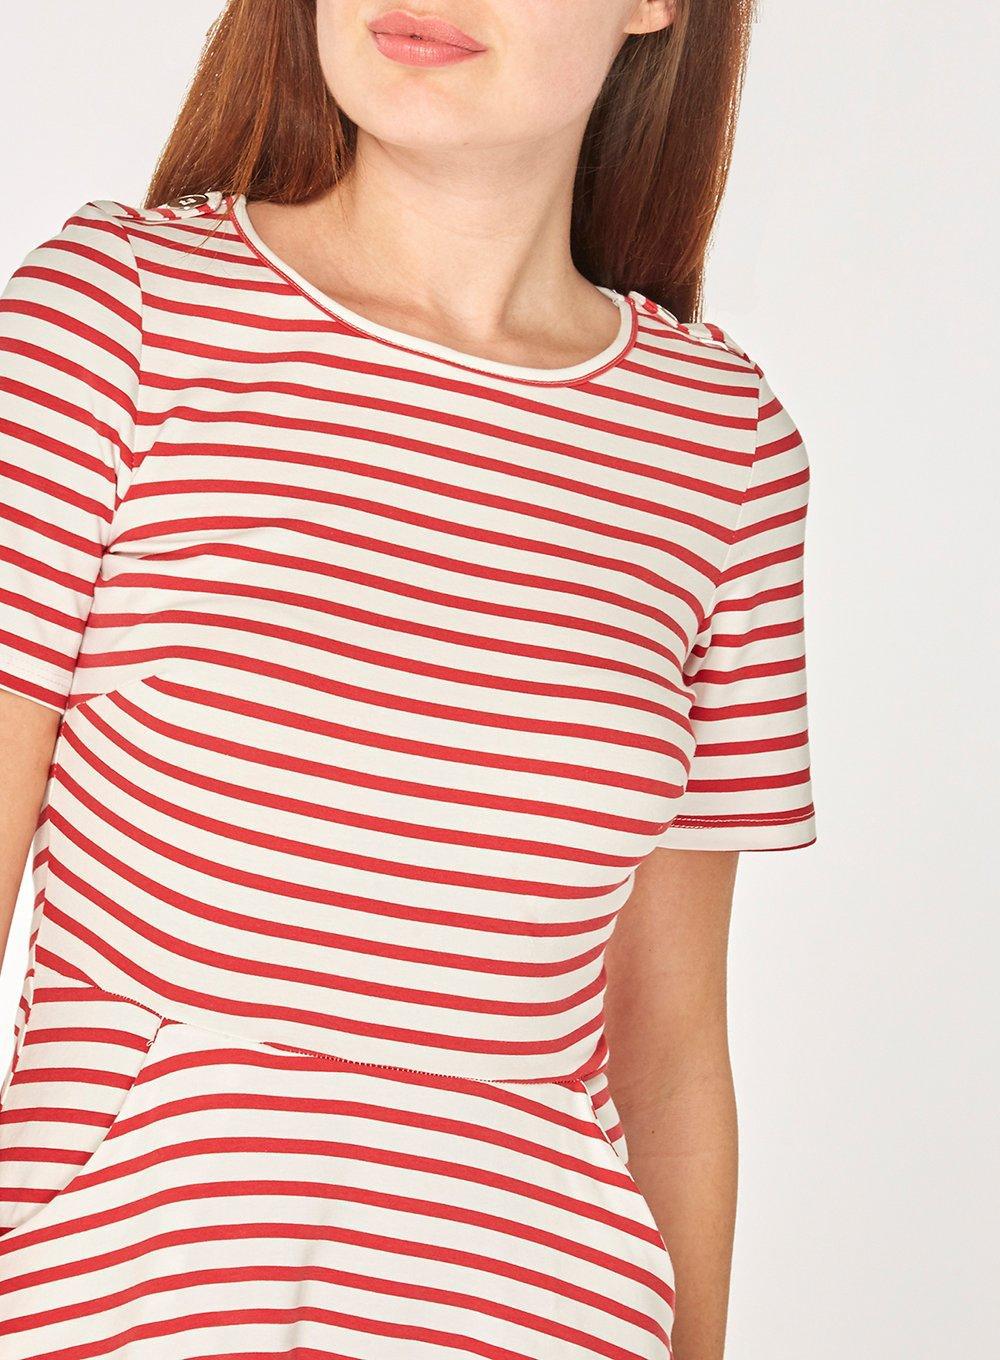 t shirt fit and flare dress